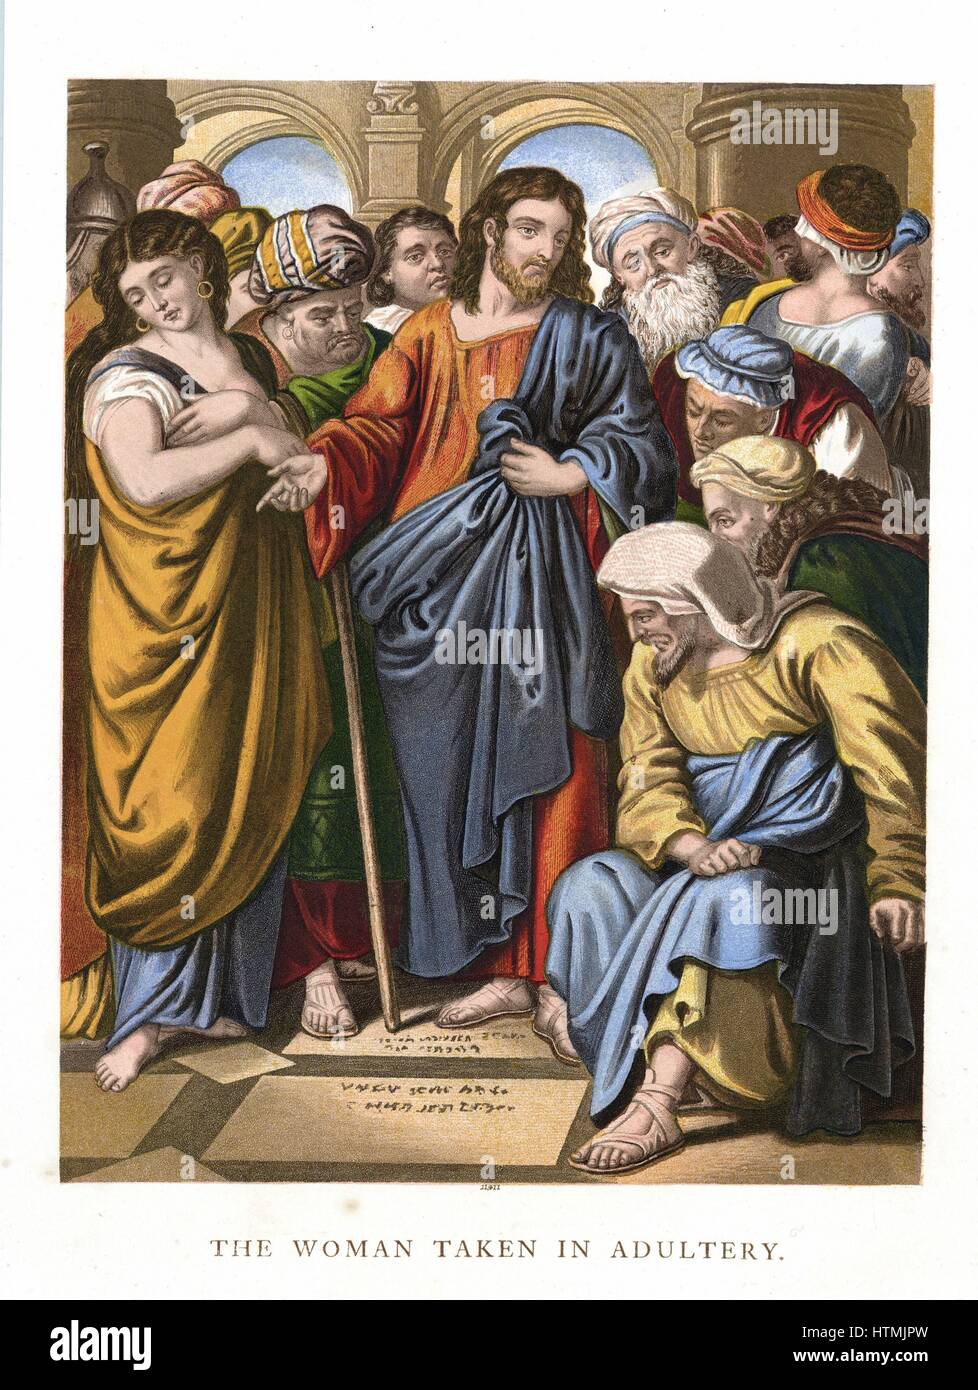 Jesus defending the woman taken in adultery against the Scribes and the Pharisees, saying: 'Let him that is without sin among you, first cast a stone at her'. John:8. Mid-19th century chromolithograph. Colour Stock Photo